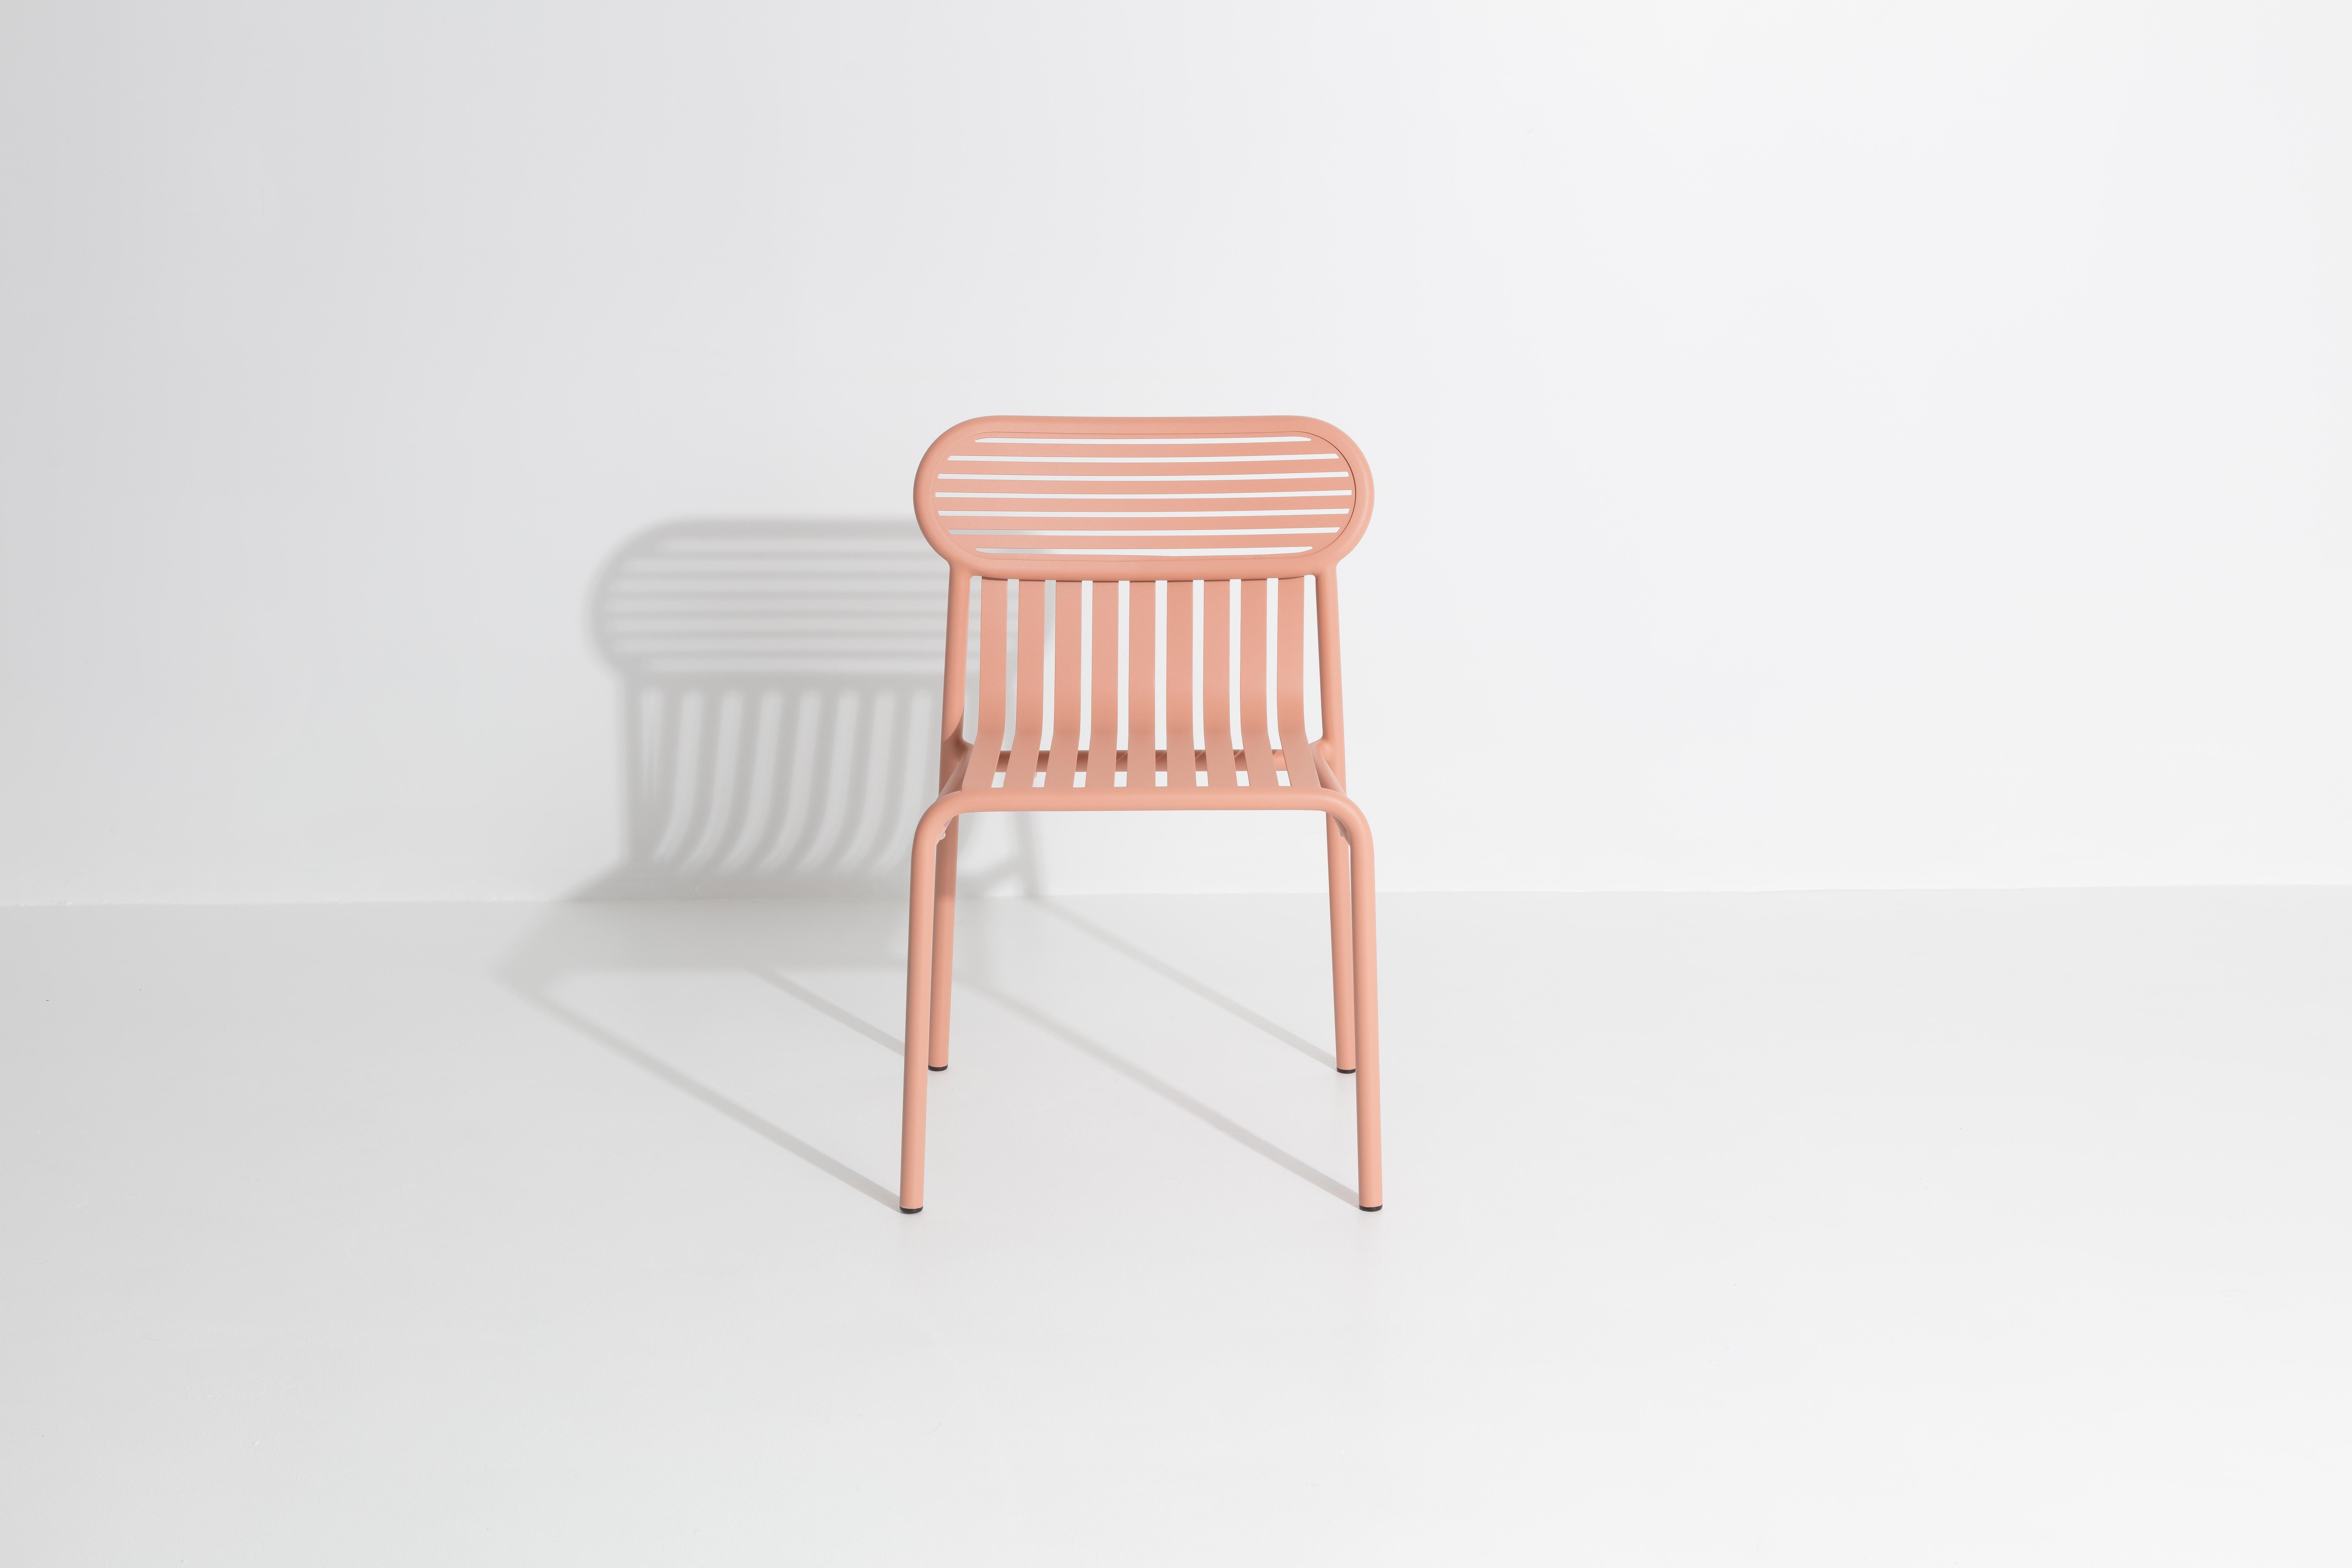 Petite Friture Week-End Chair in Blush Aluminium by Studio BrichetZiegler, 2017

The week-end collection is a full range of outdoor furniture, in aluminium grained epoxy paint, matt finish, that includes 18 functions and 8 colours for the retail